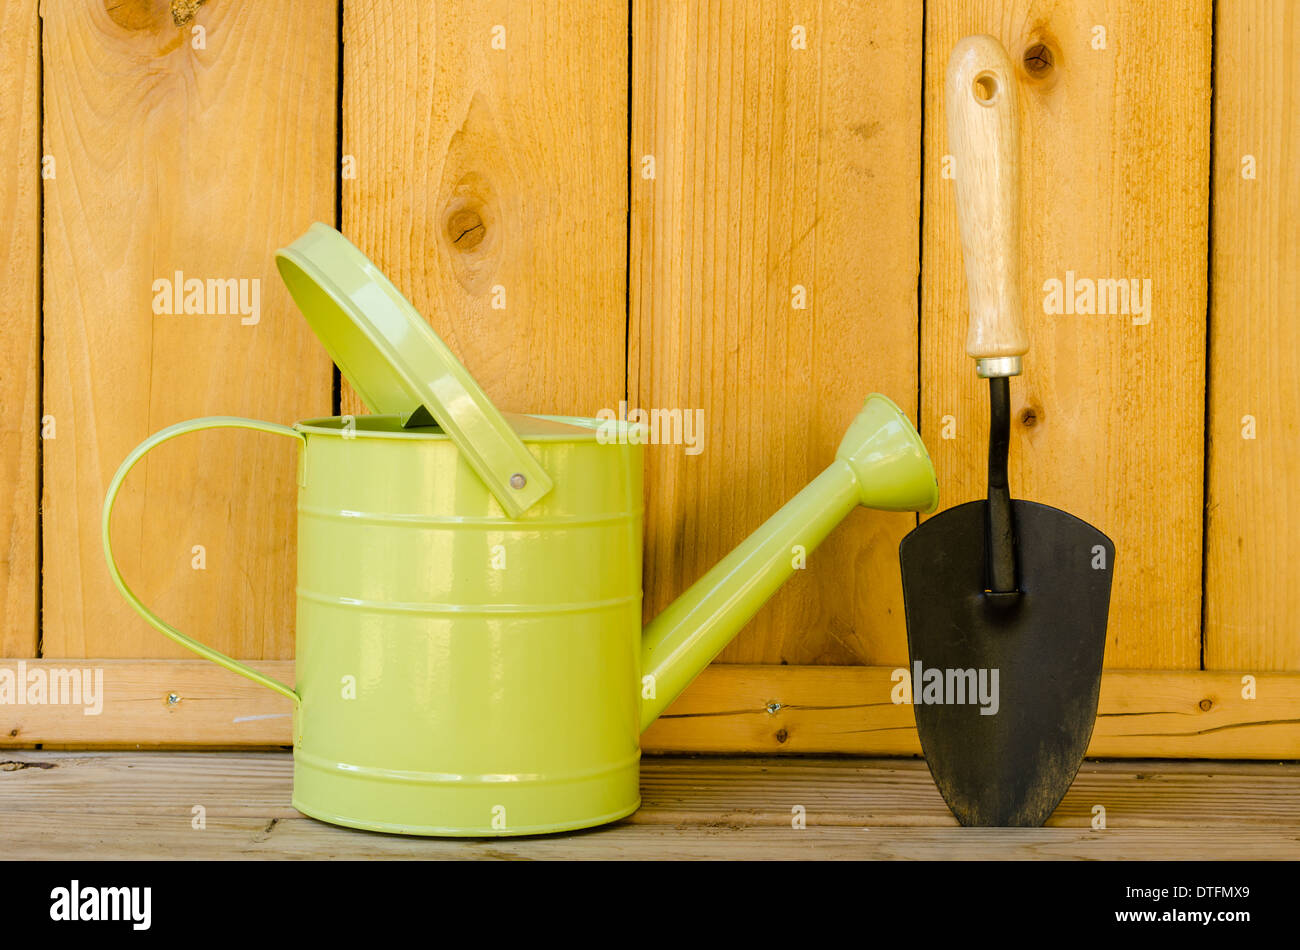 Watering can and trowel on wood background. Stock Photo